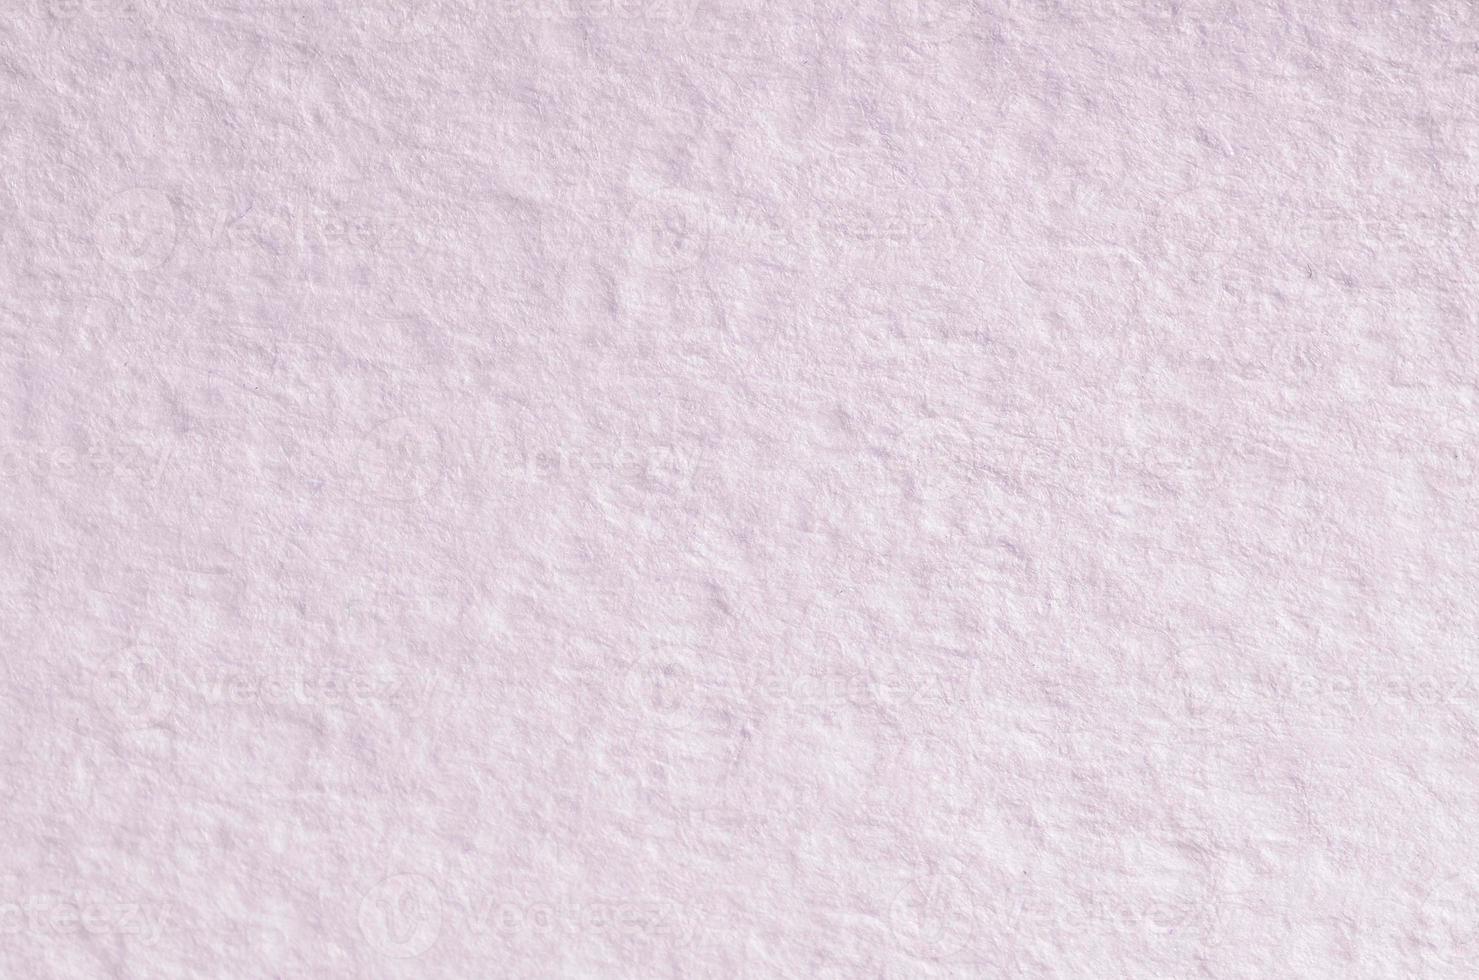 Texture Of Thick Paper Intended For Watercolor Painting. Macro Snapshot Of  Details Of The Relief Paper Structure Stock Photo, Picture and Royalty Free  Image. Image 93511382.